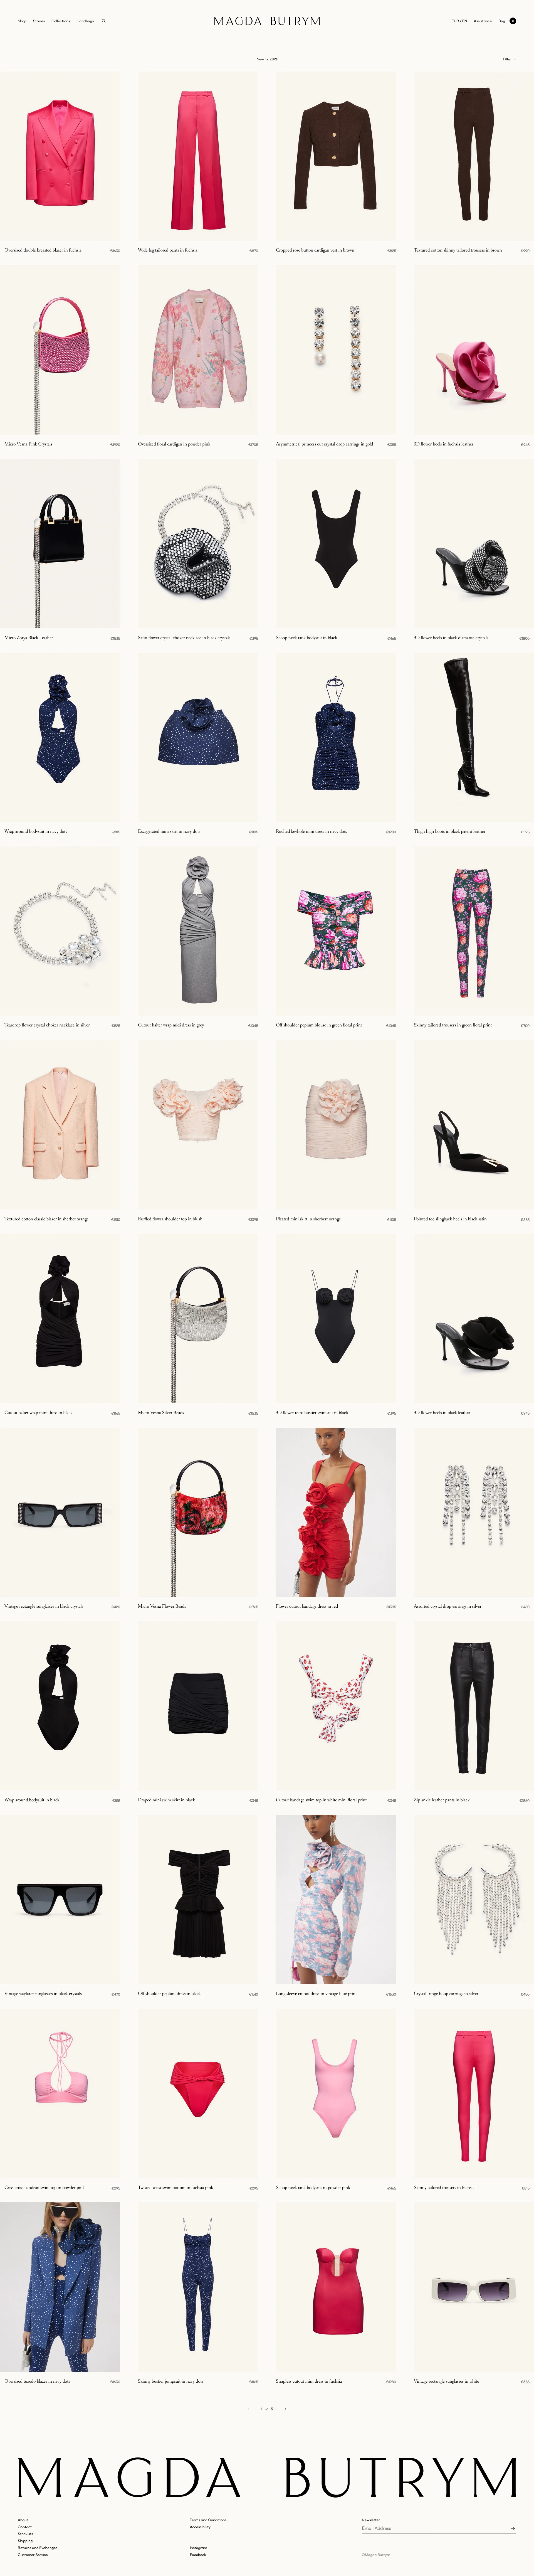 Magda Butrym Landing Page Example: Official luxury clothing designer ready-to-wear brand store Magda Butrym. Online Fashion Store. Luxury Designer Clothes. Luxury Fashion.